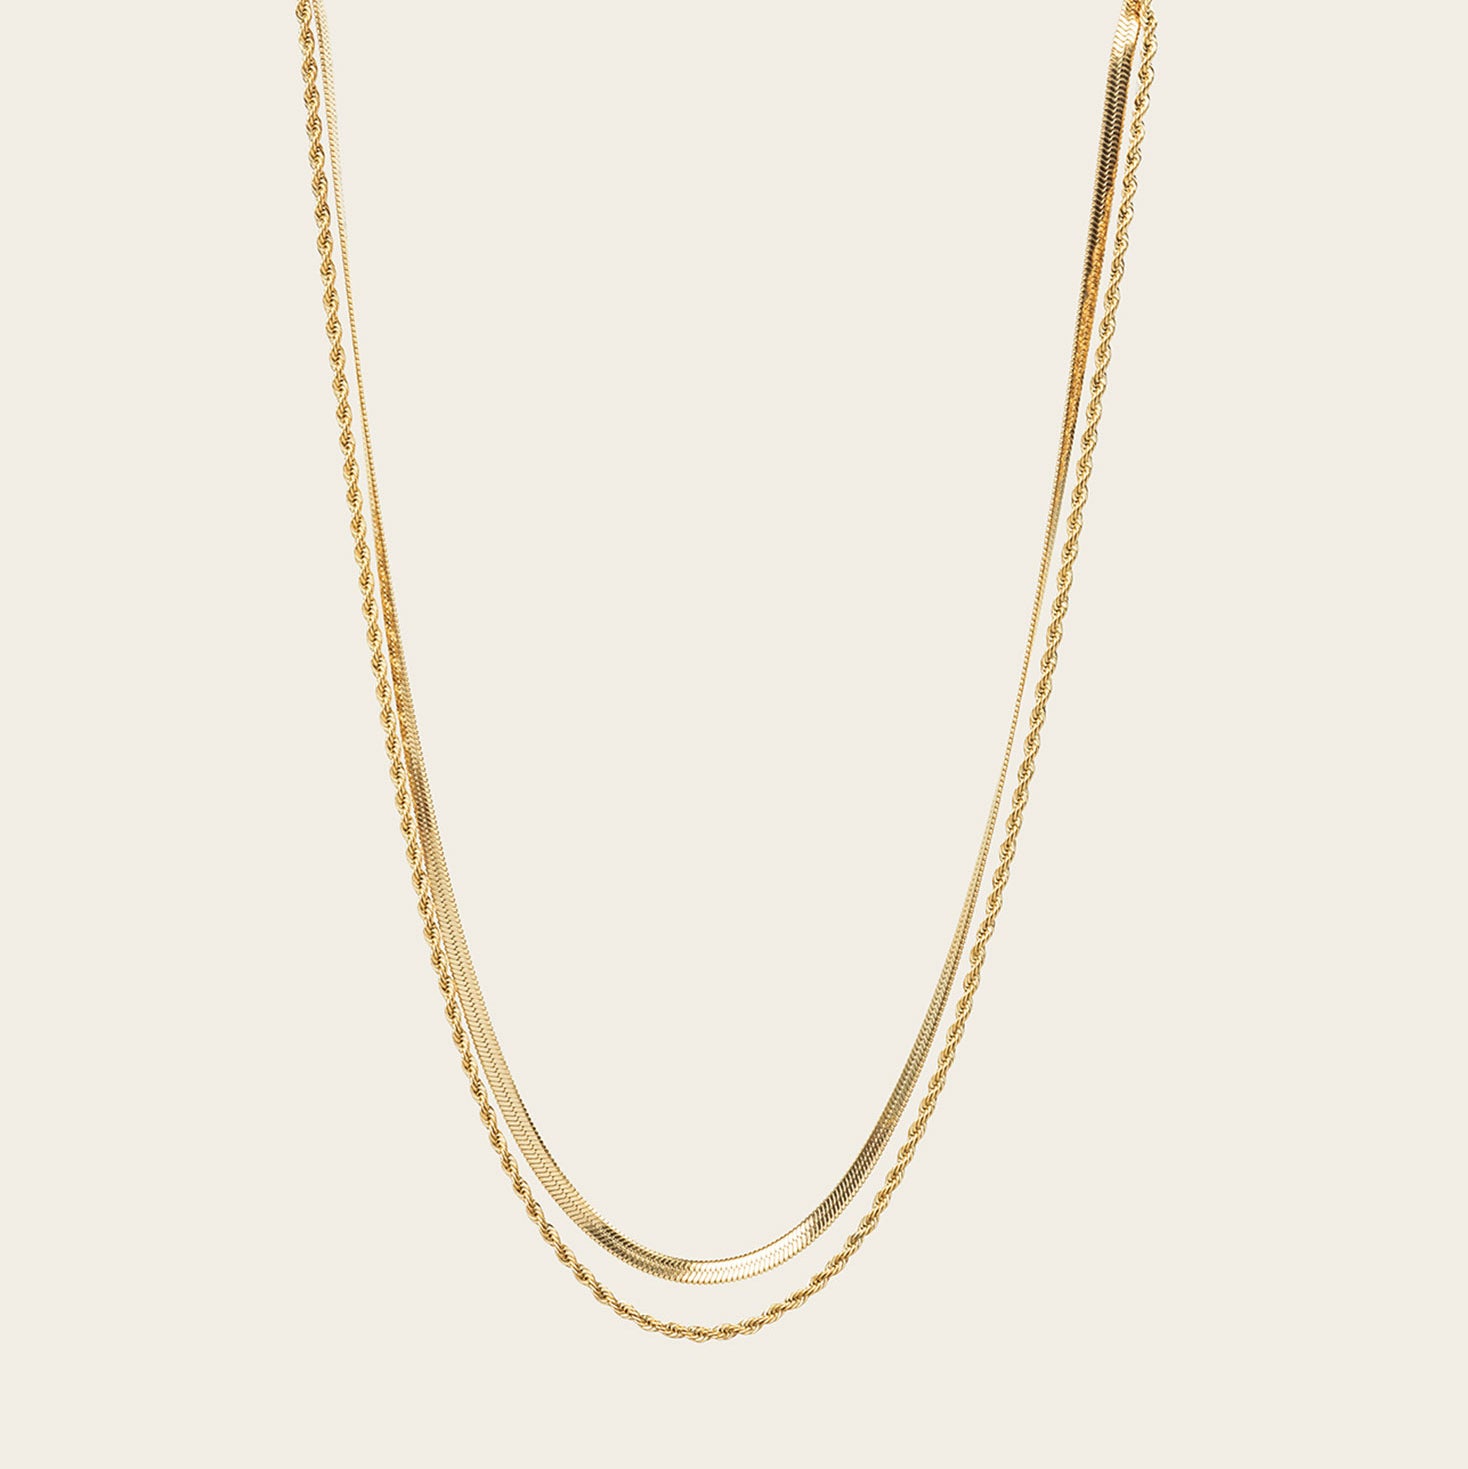 Image of the Twisted Double Layered Necklace consists of 14K Gold Plated Stainless Steel, providing water resistance, non-tarnishing, and leading, nickel, and cadmium free properties. Additionally, it is adjustable, though only one necklace is included.